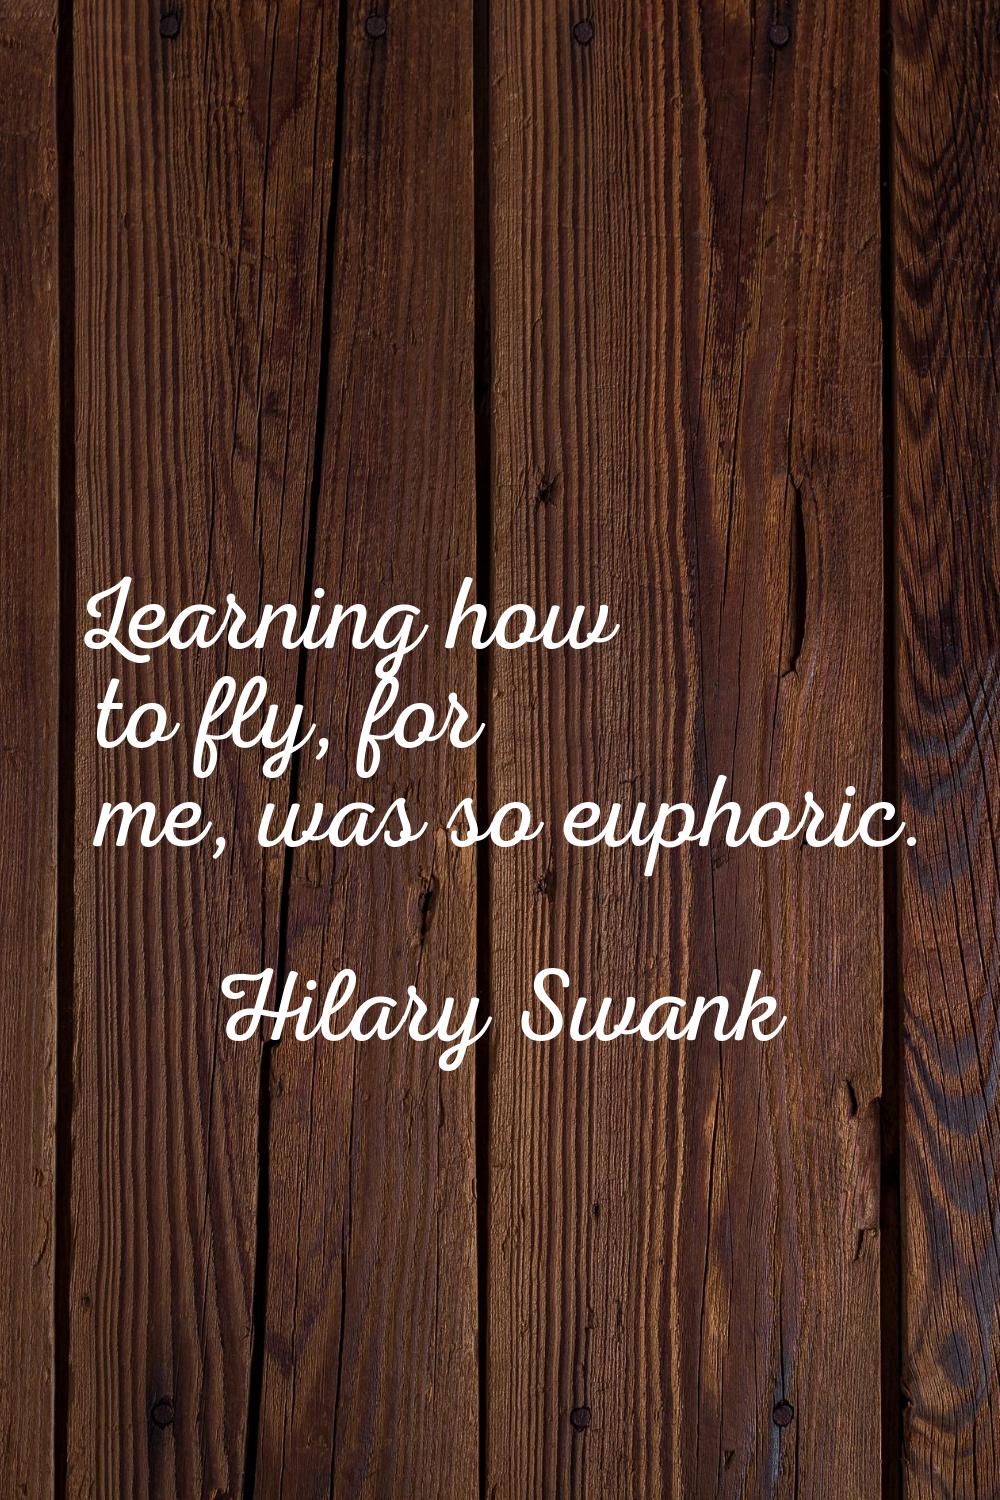 Learning how to fly, for me, was so euphoric.